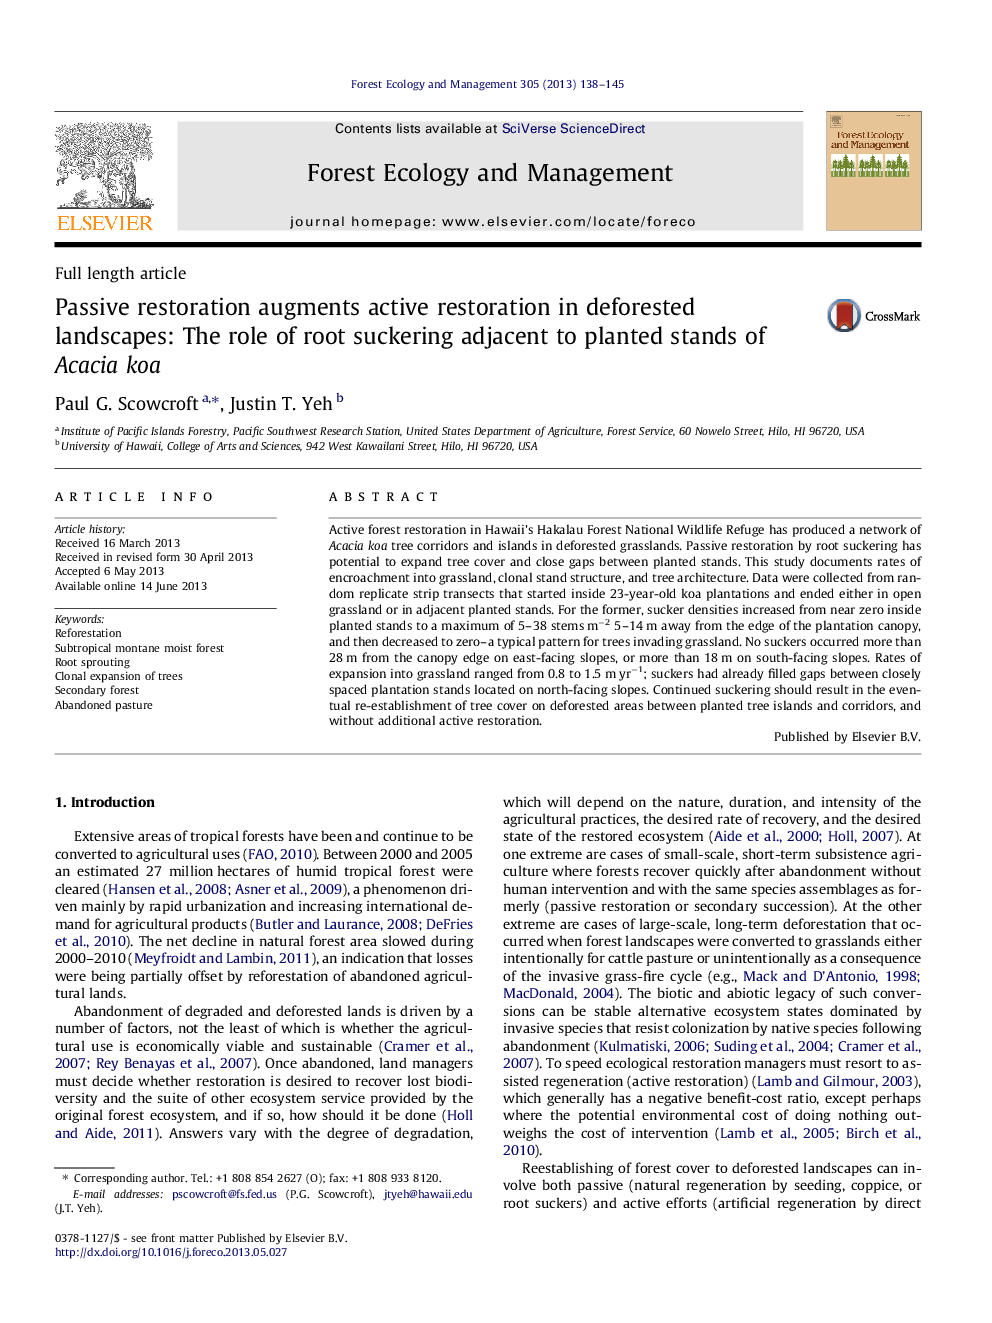 Passive restoration augments active restoration in deforested landscapes: The role of root suckering adjacent to planted stands of Acacia koa